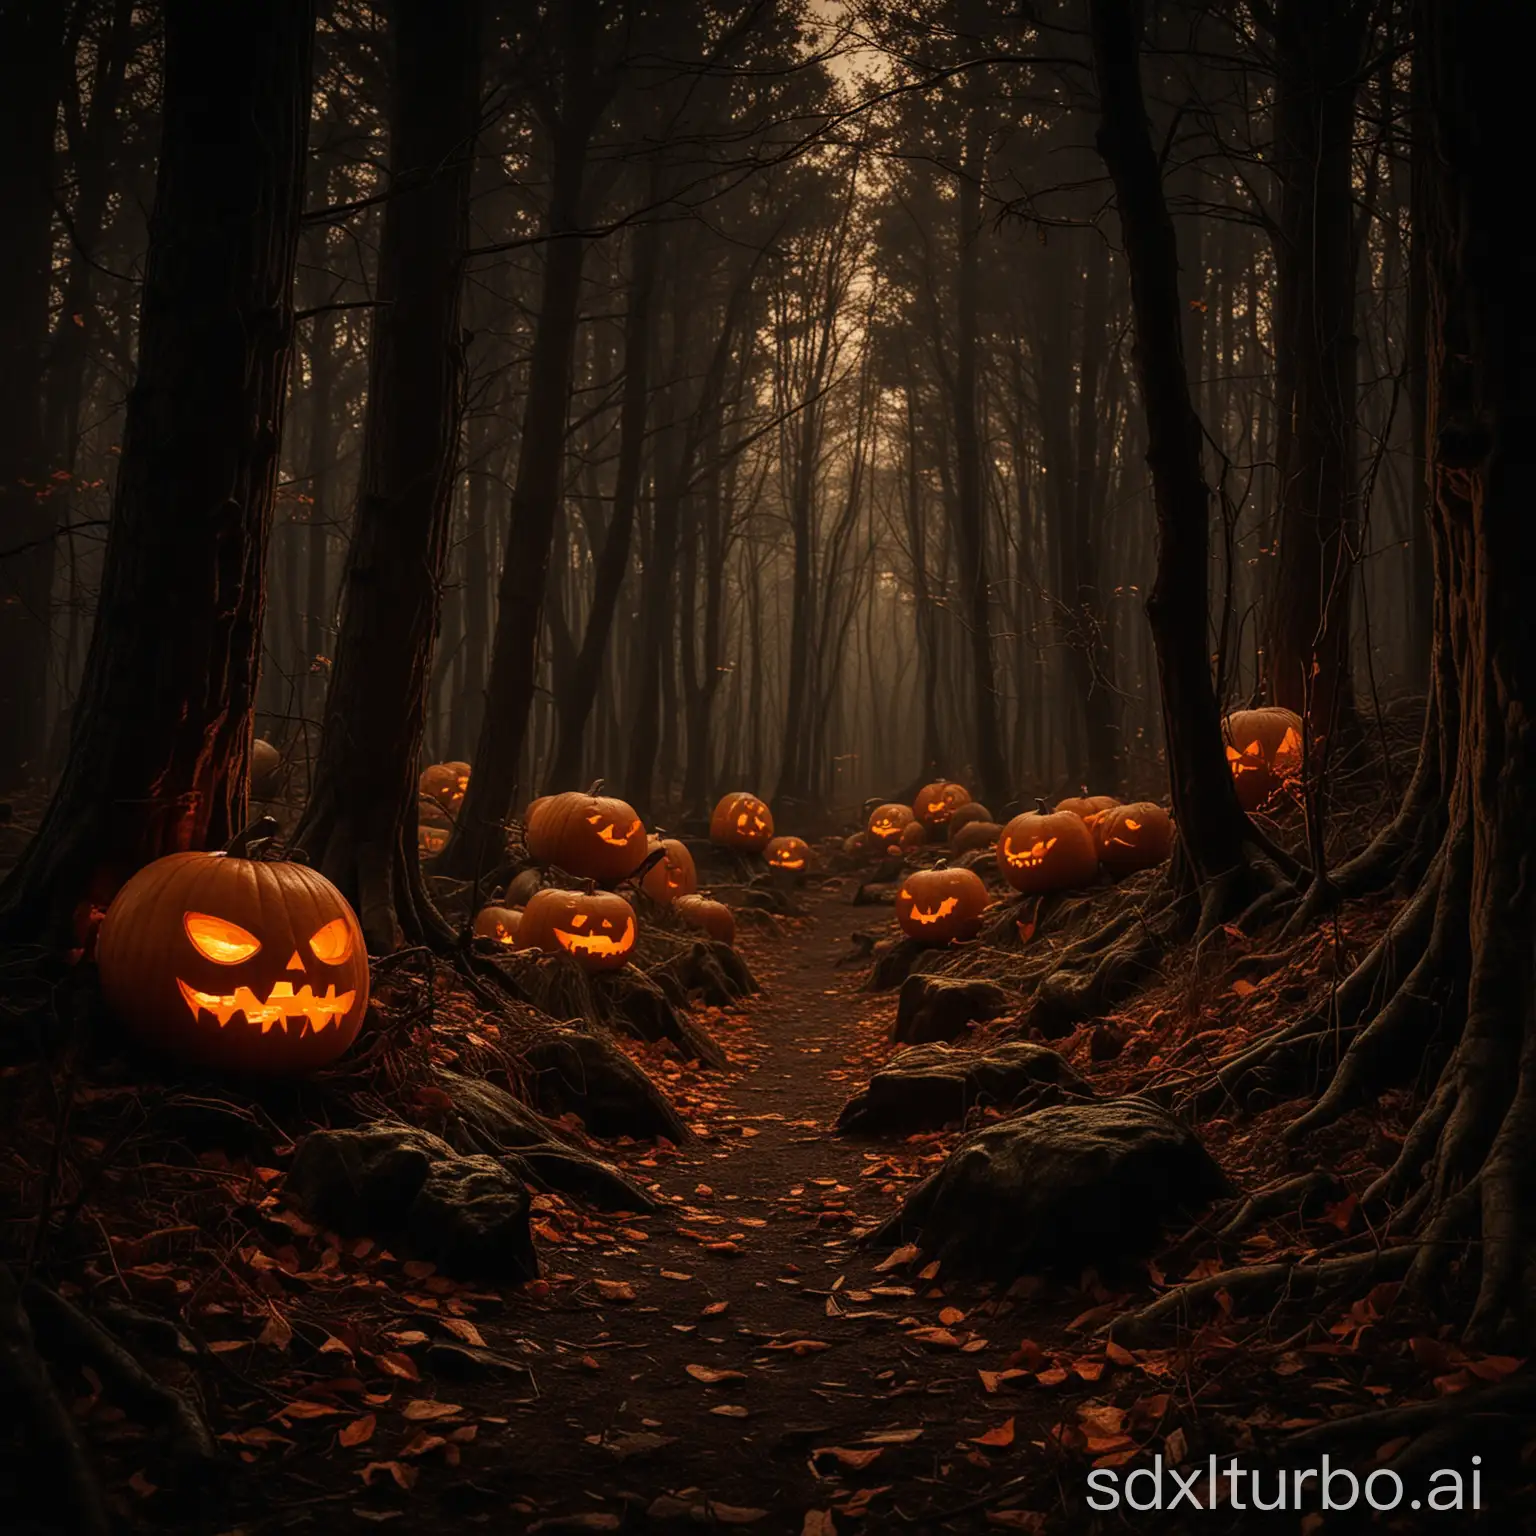 A dark forest illuminated only by the eerie glow of carved pumpkins, strange shapes hidden in the shadows.